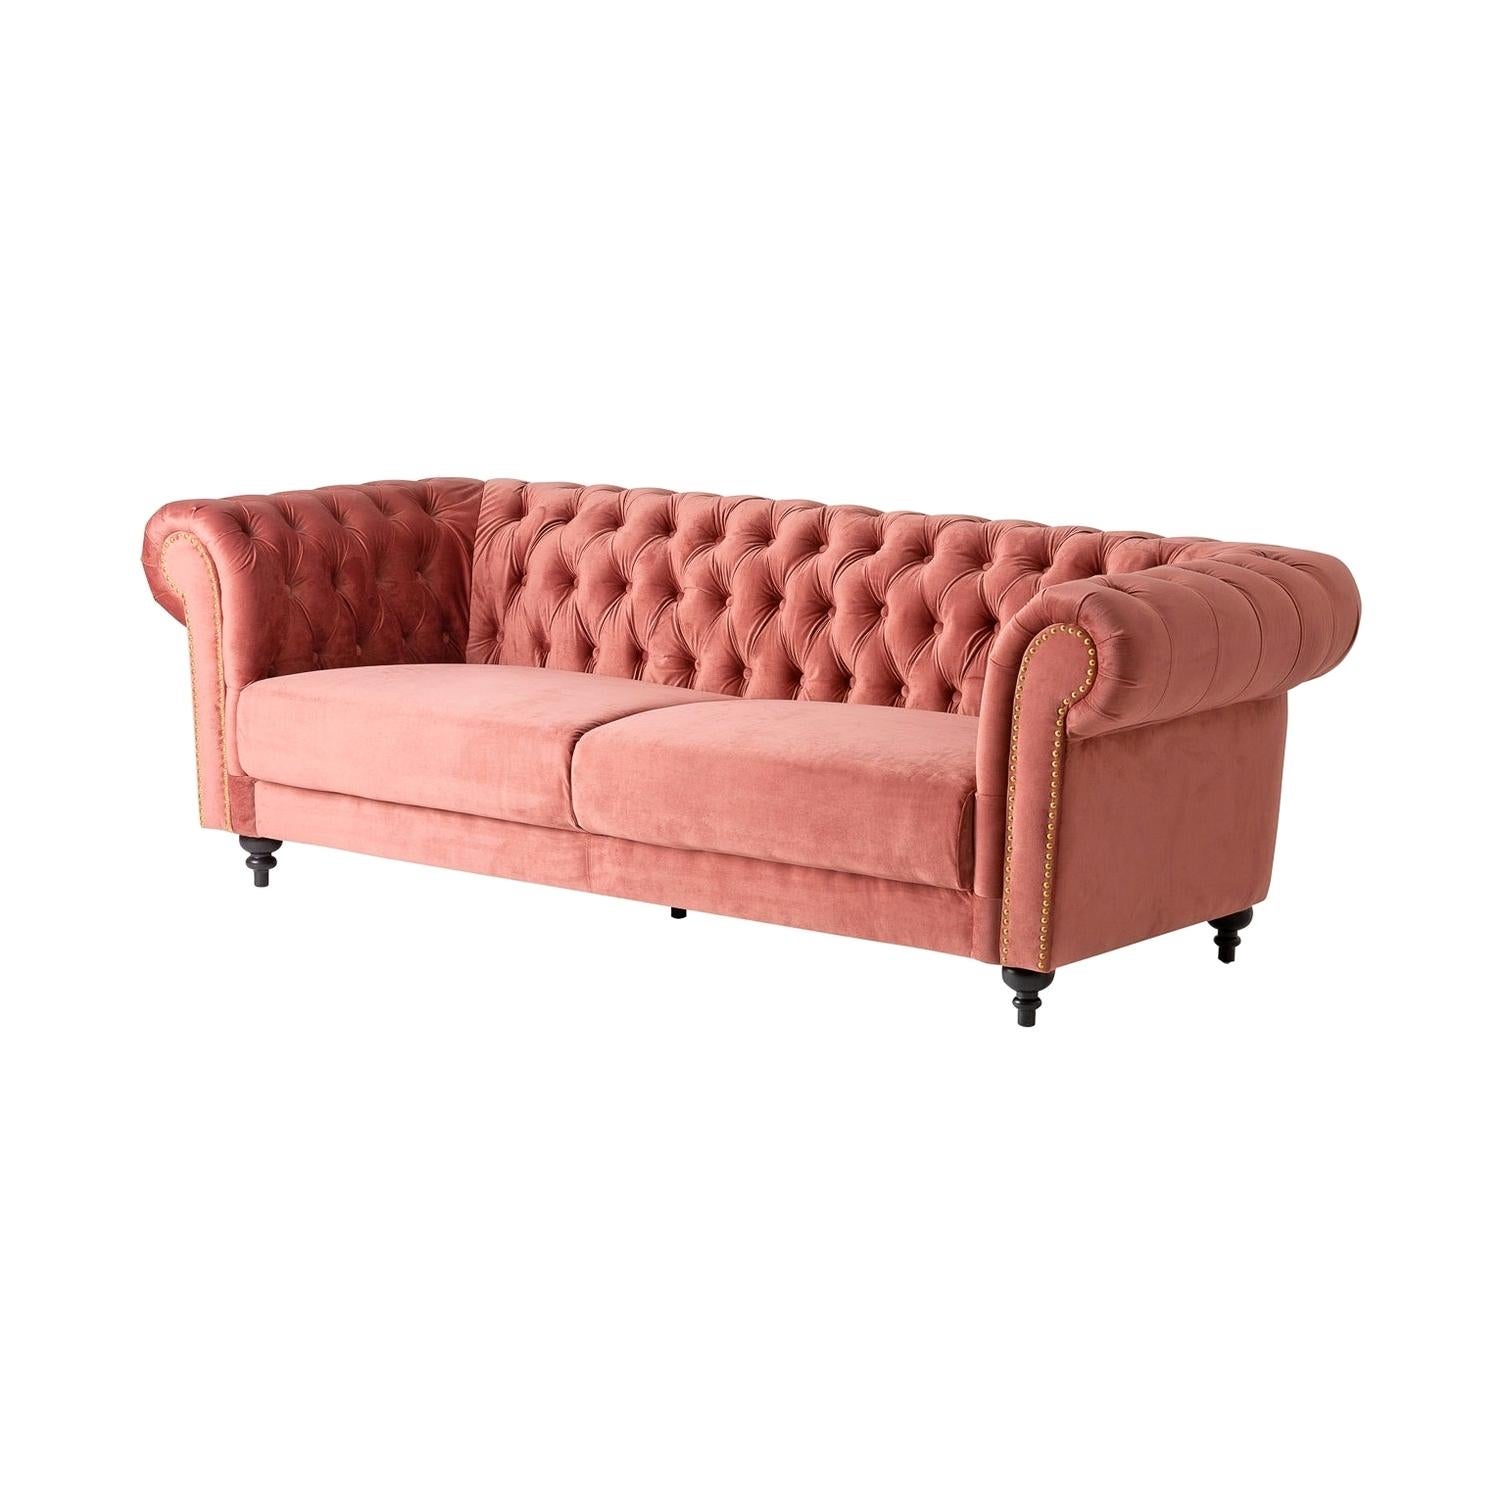 Powdery Pink Fabric and Black Wooden Feet Padded Chesterfield Sofa